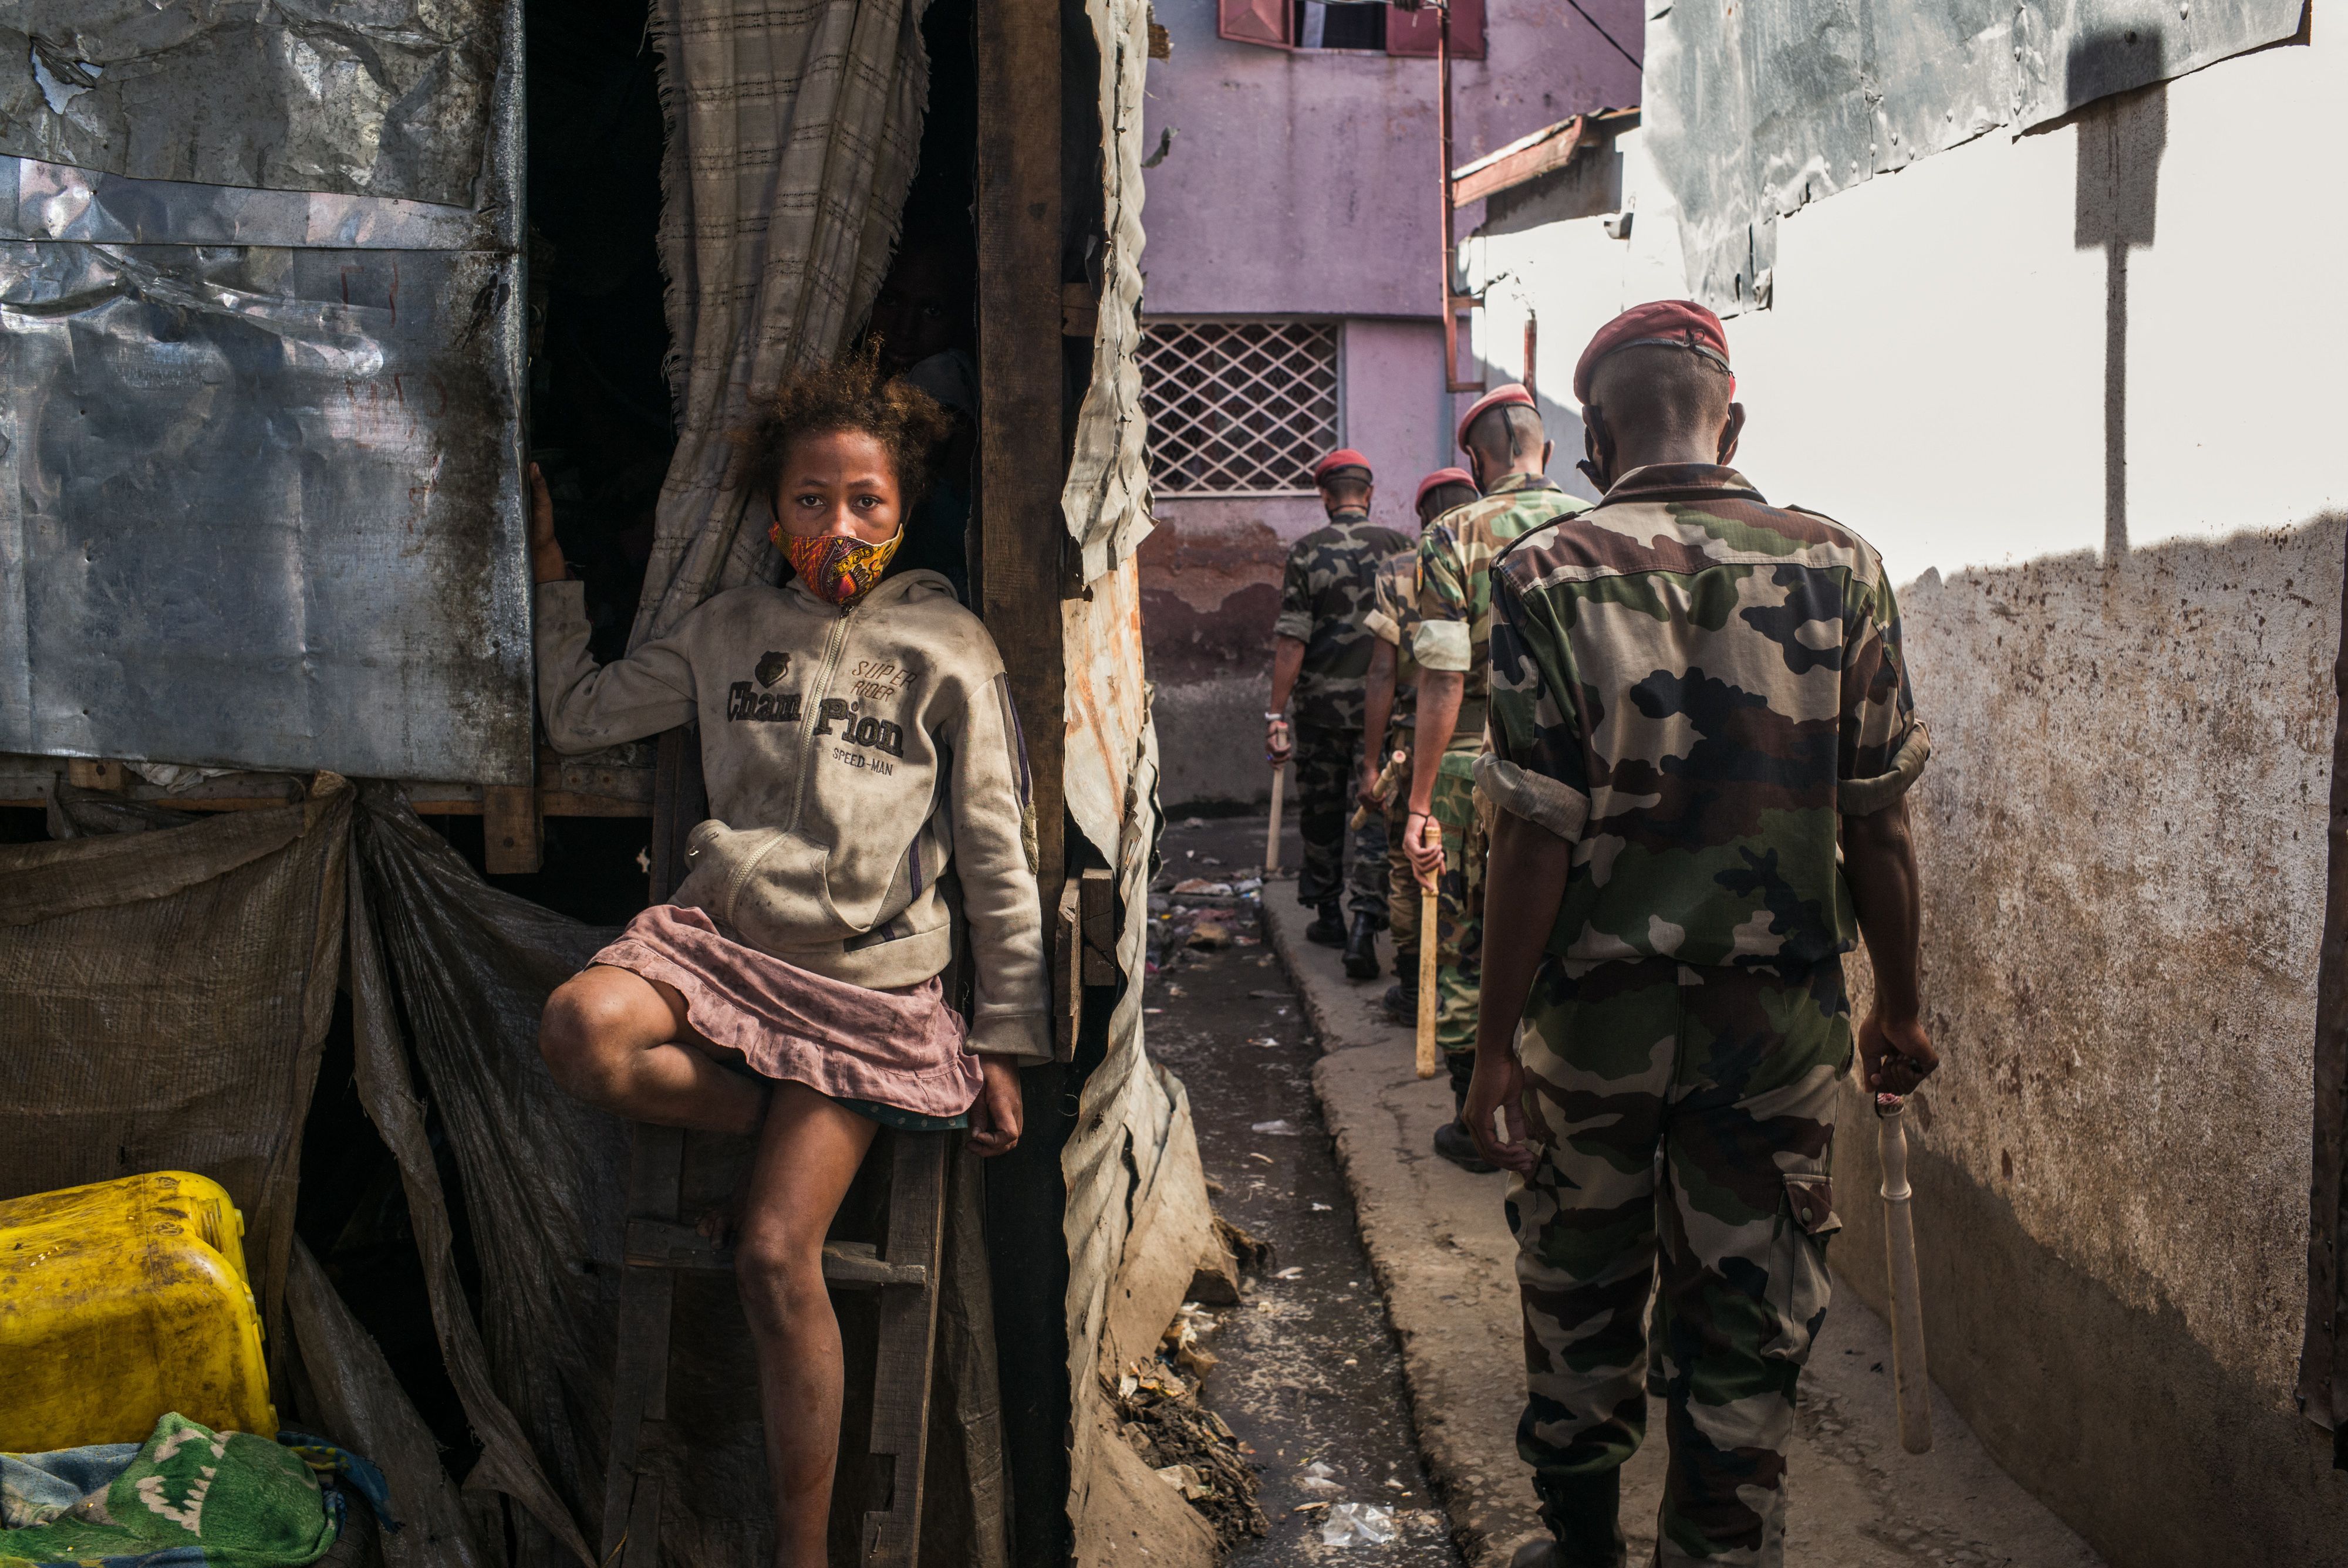 A child sits as members of the army patrol the streets of Antananarivo ordering citizens to go home as the Malagasy authorities declared a total weekend lockdown in the capital on April 24